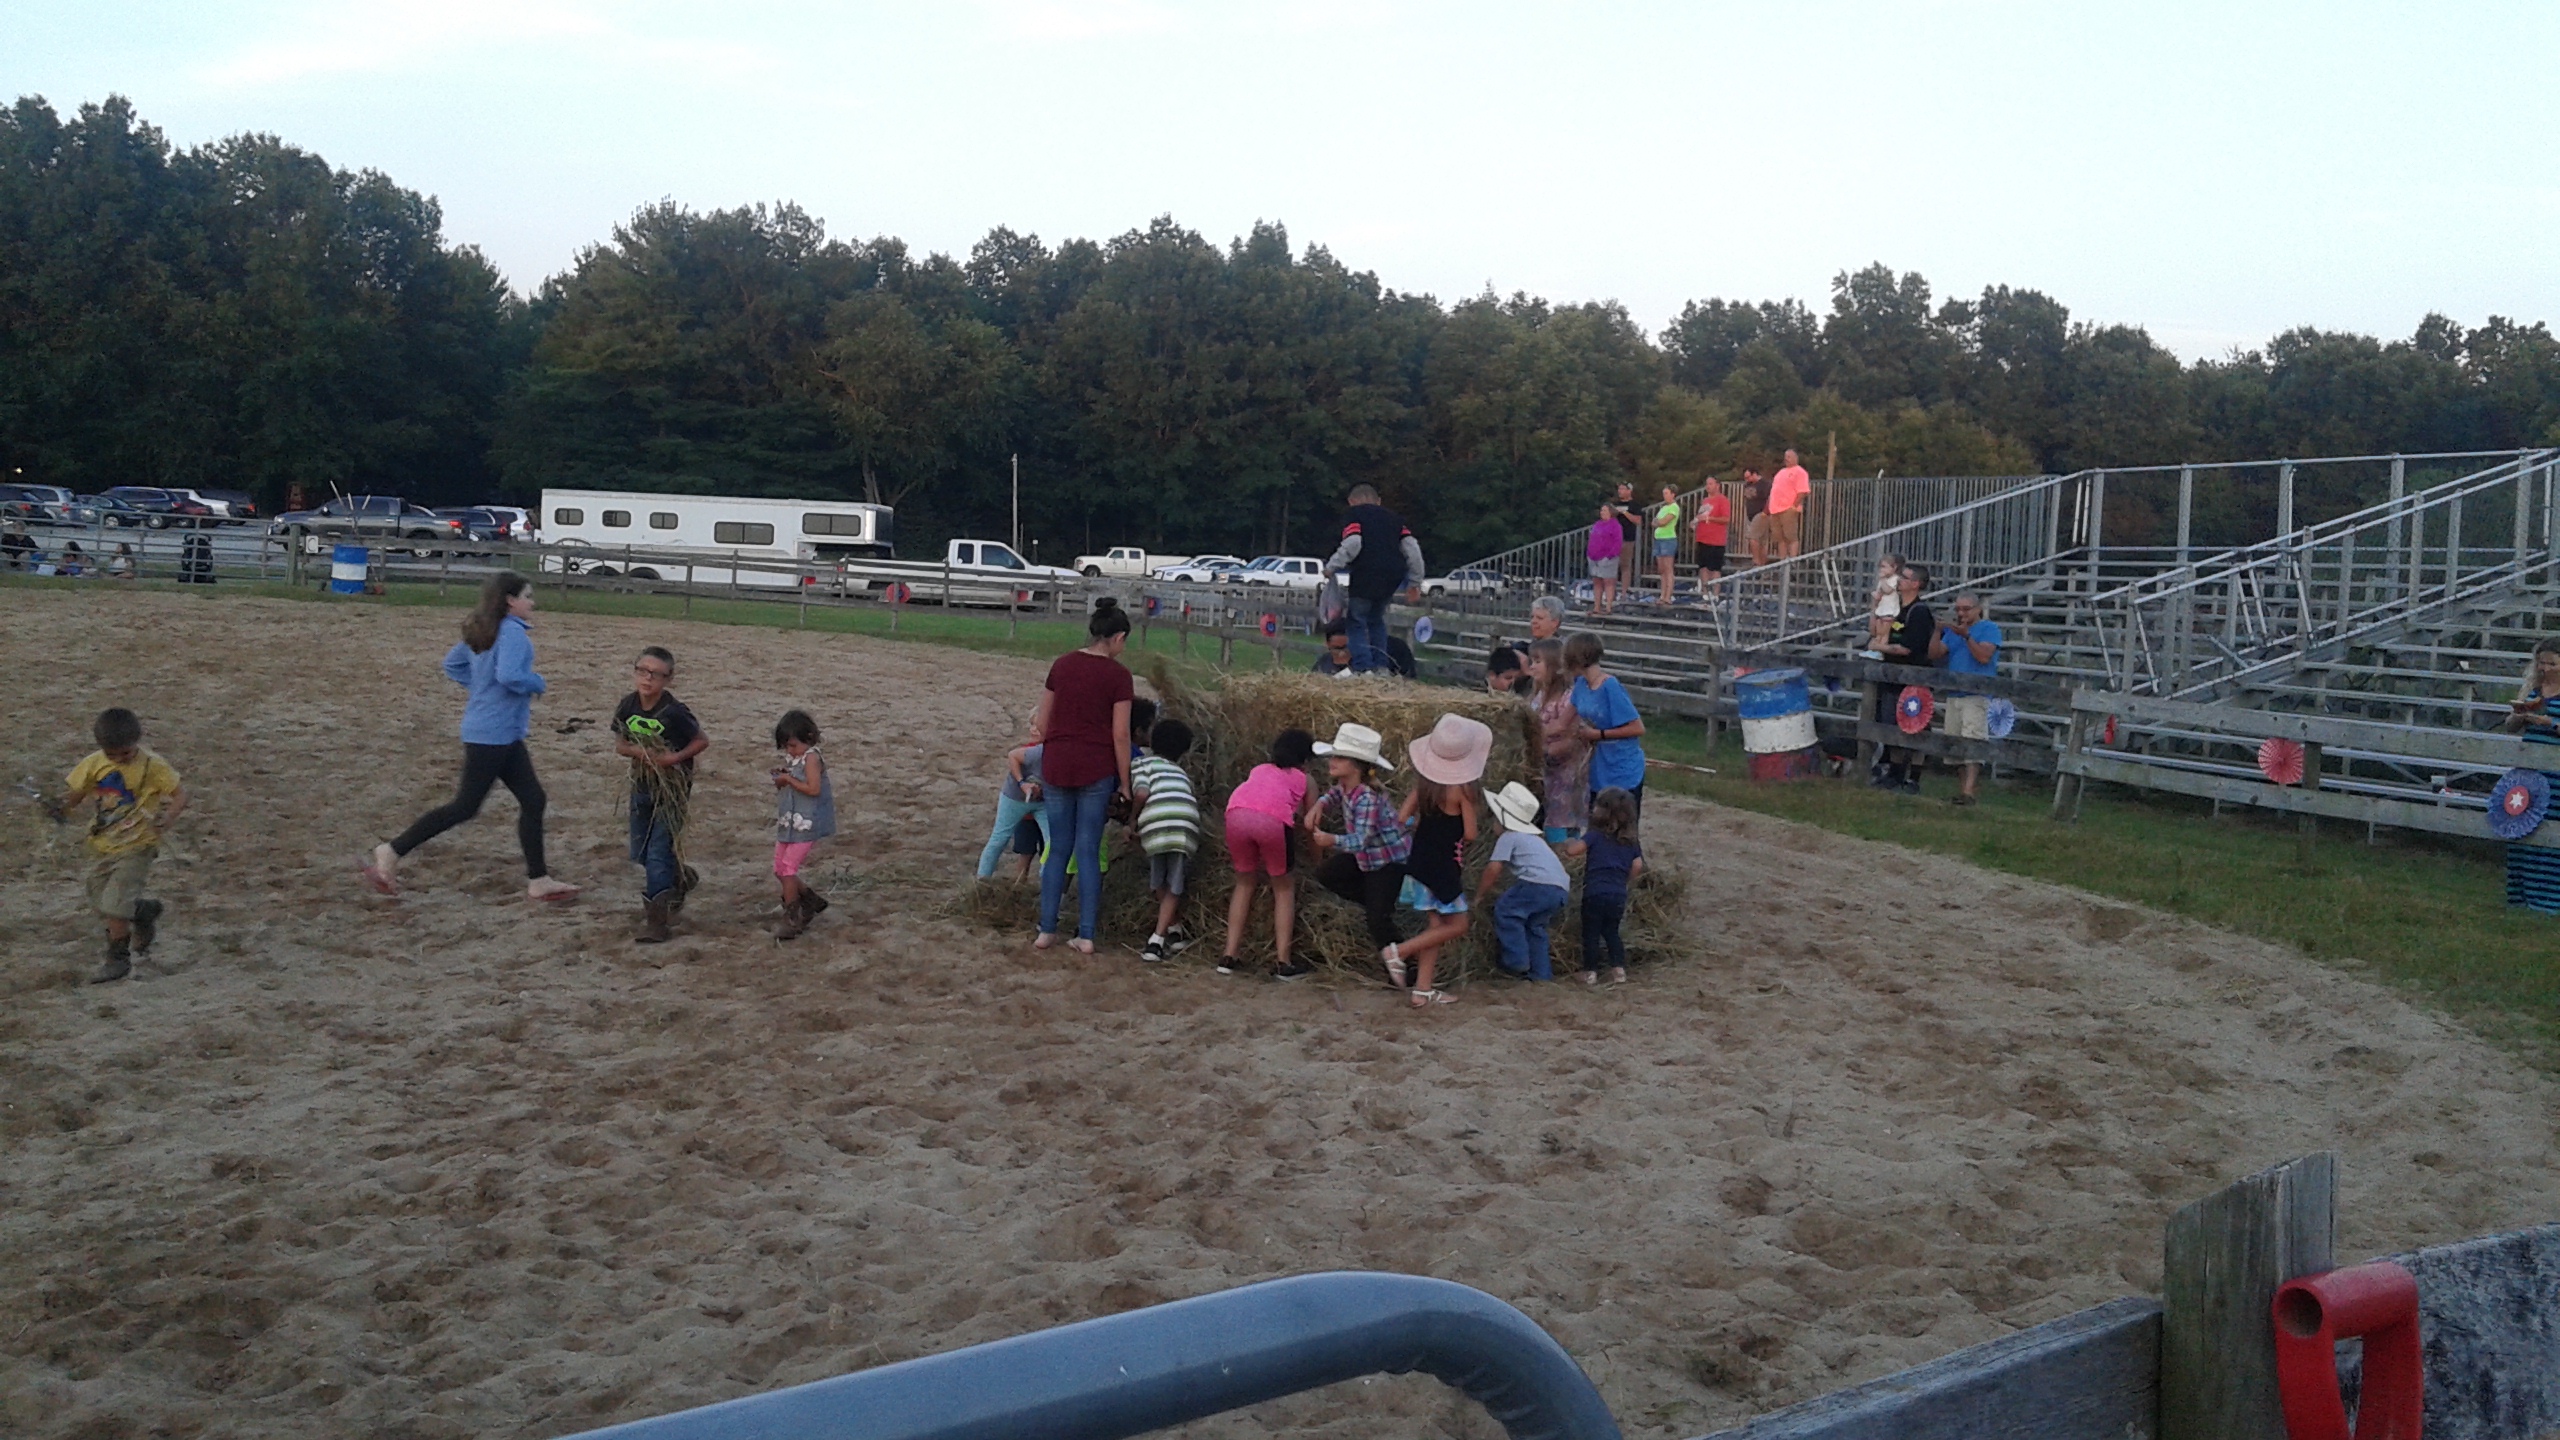 Fun rodeo for the kids